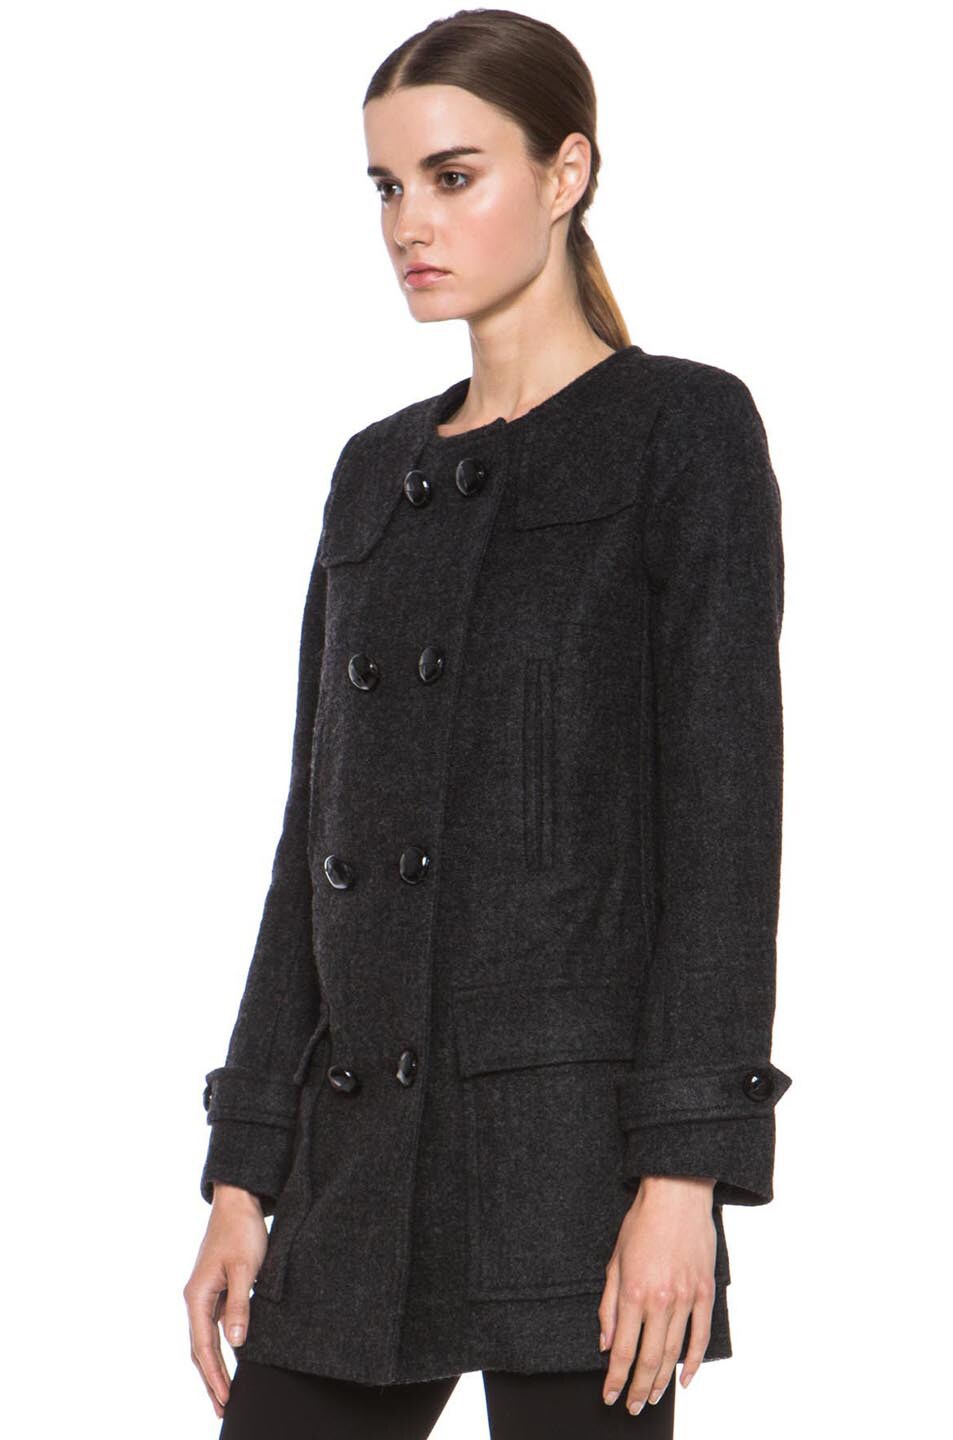 Isabel Marant Etoile Clifford Caban Wool-Blend Peacoat in Anthracite | FWRD